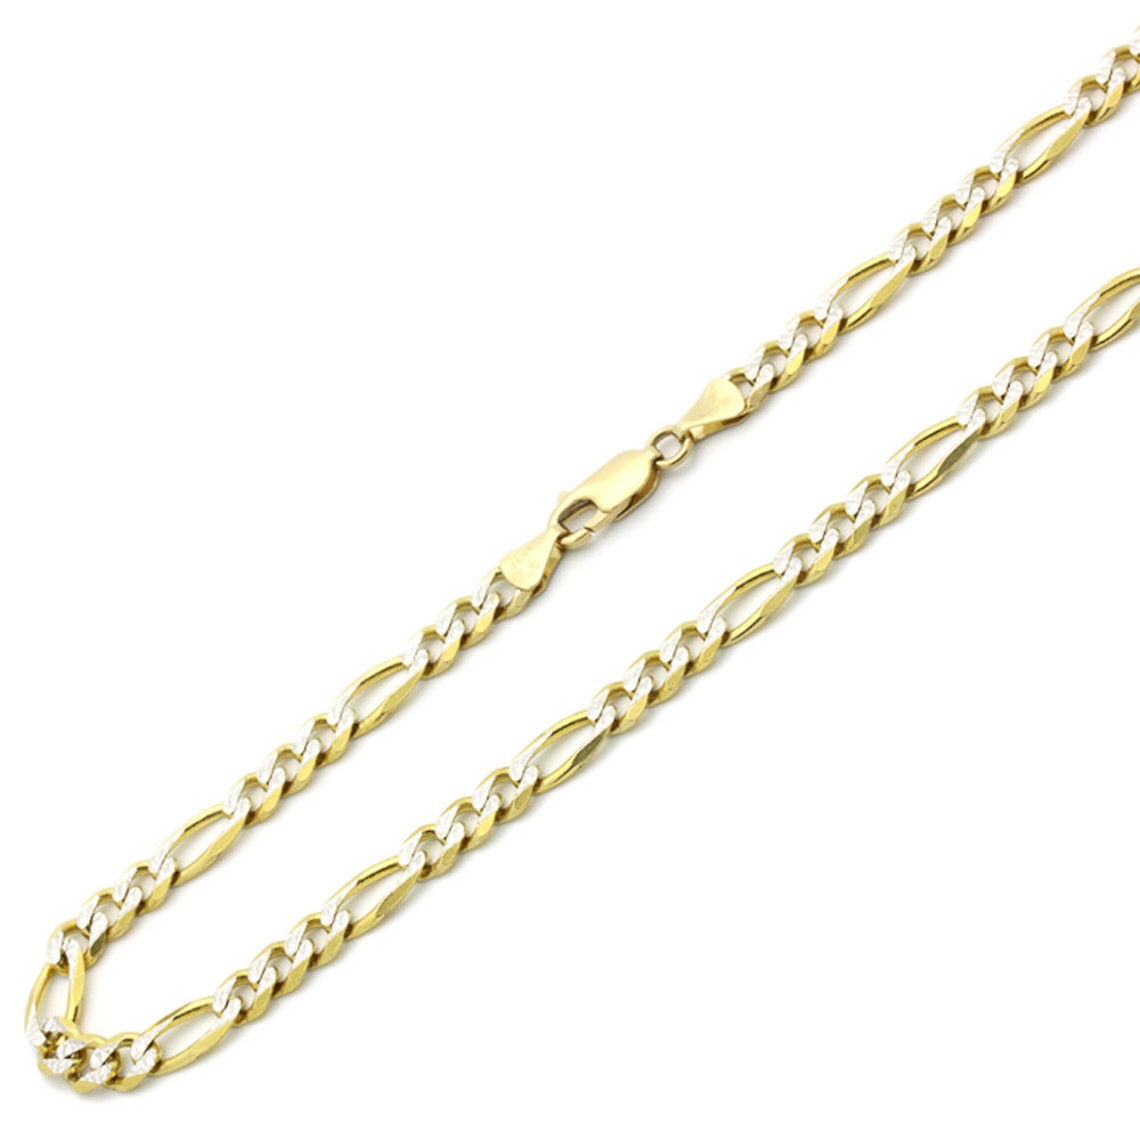 Solid 14K Gold Chain Necklace 6mm Concaved White Pave Figaro - Etsy